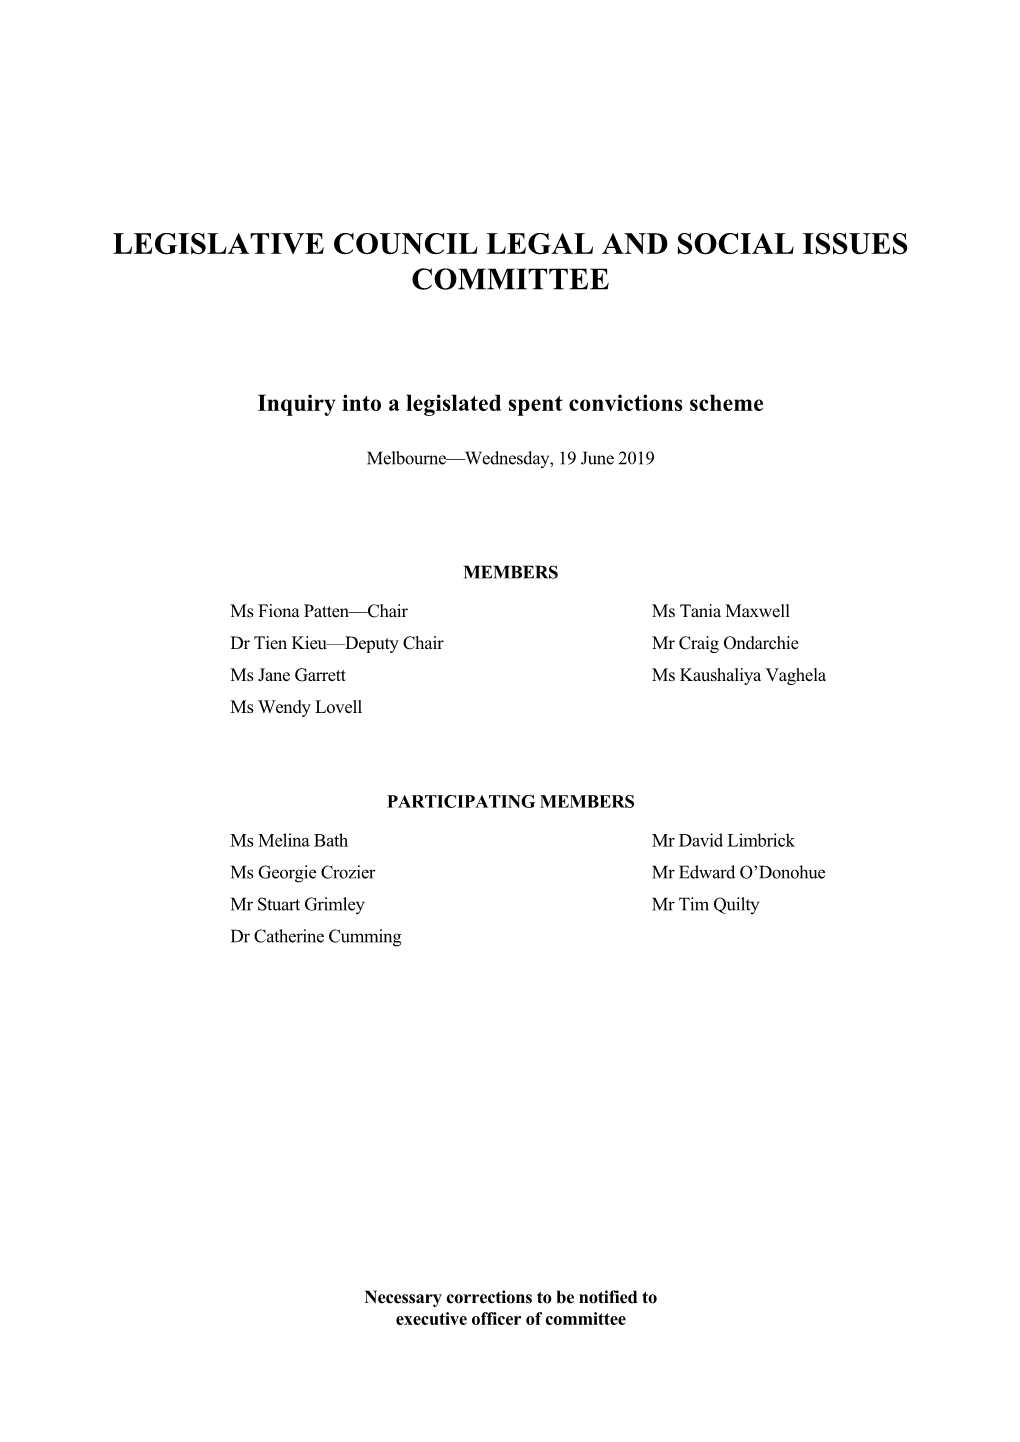 Legislative Council Legal and Social Issues Committee